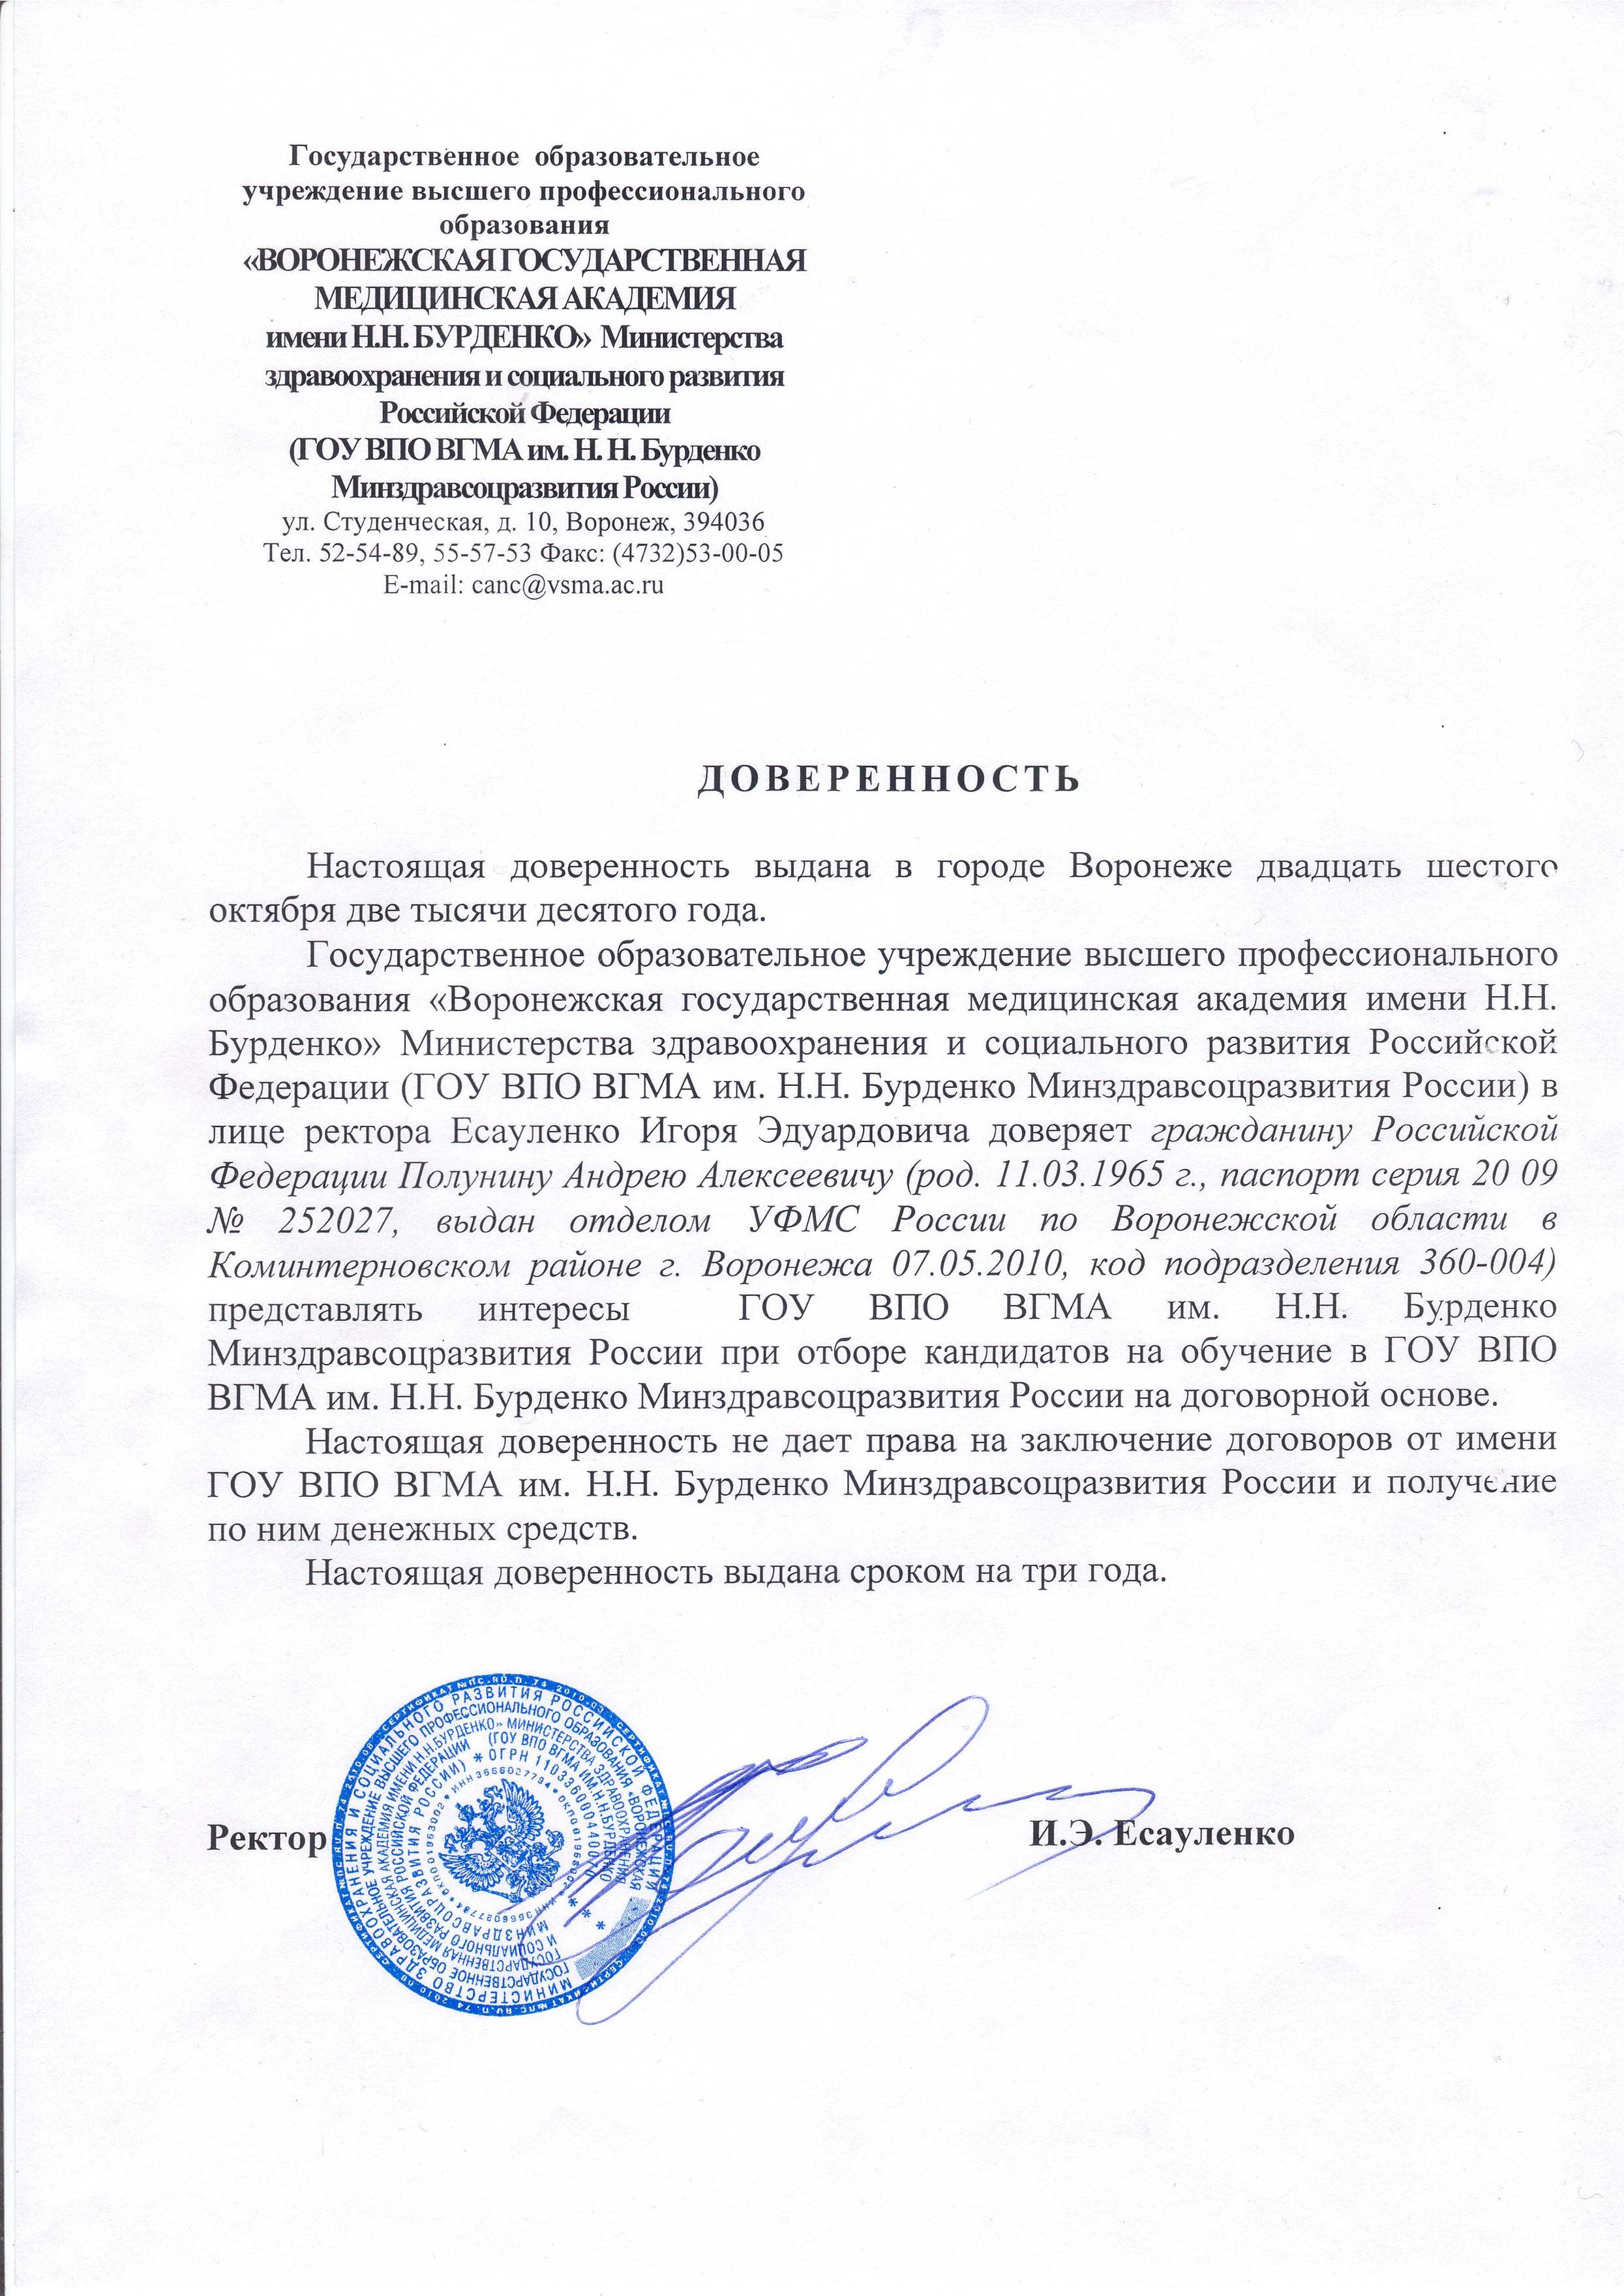 Letter of Authorization form Voronezh State Medical Academy